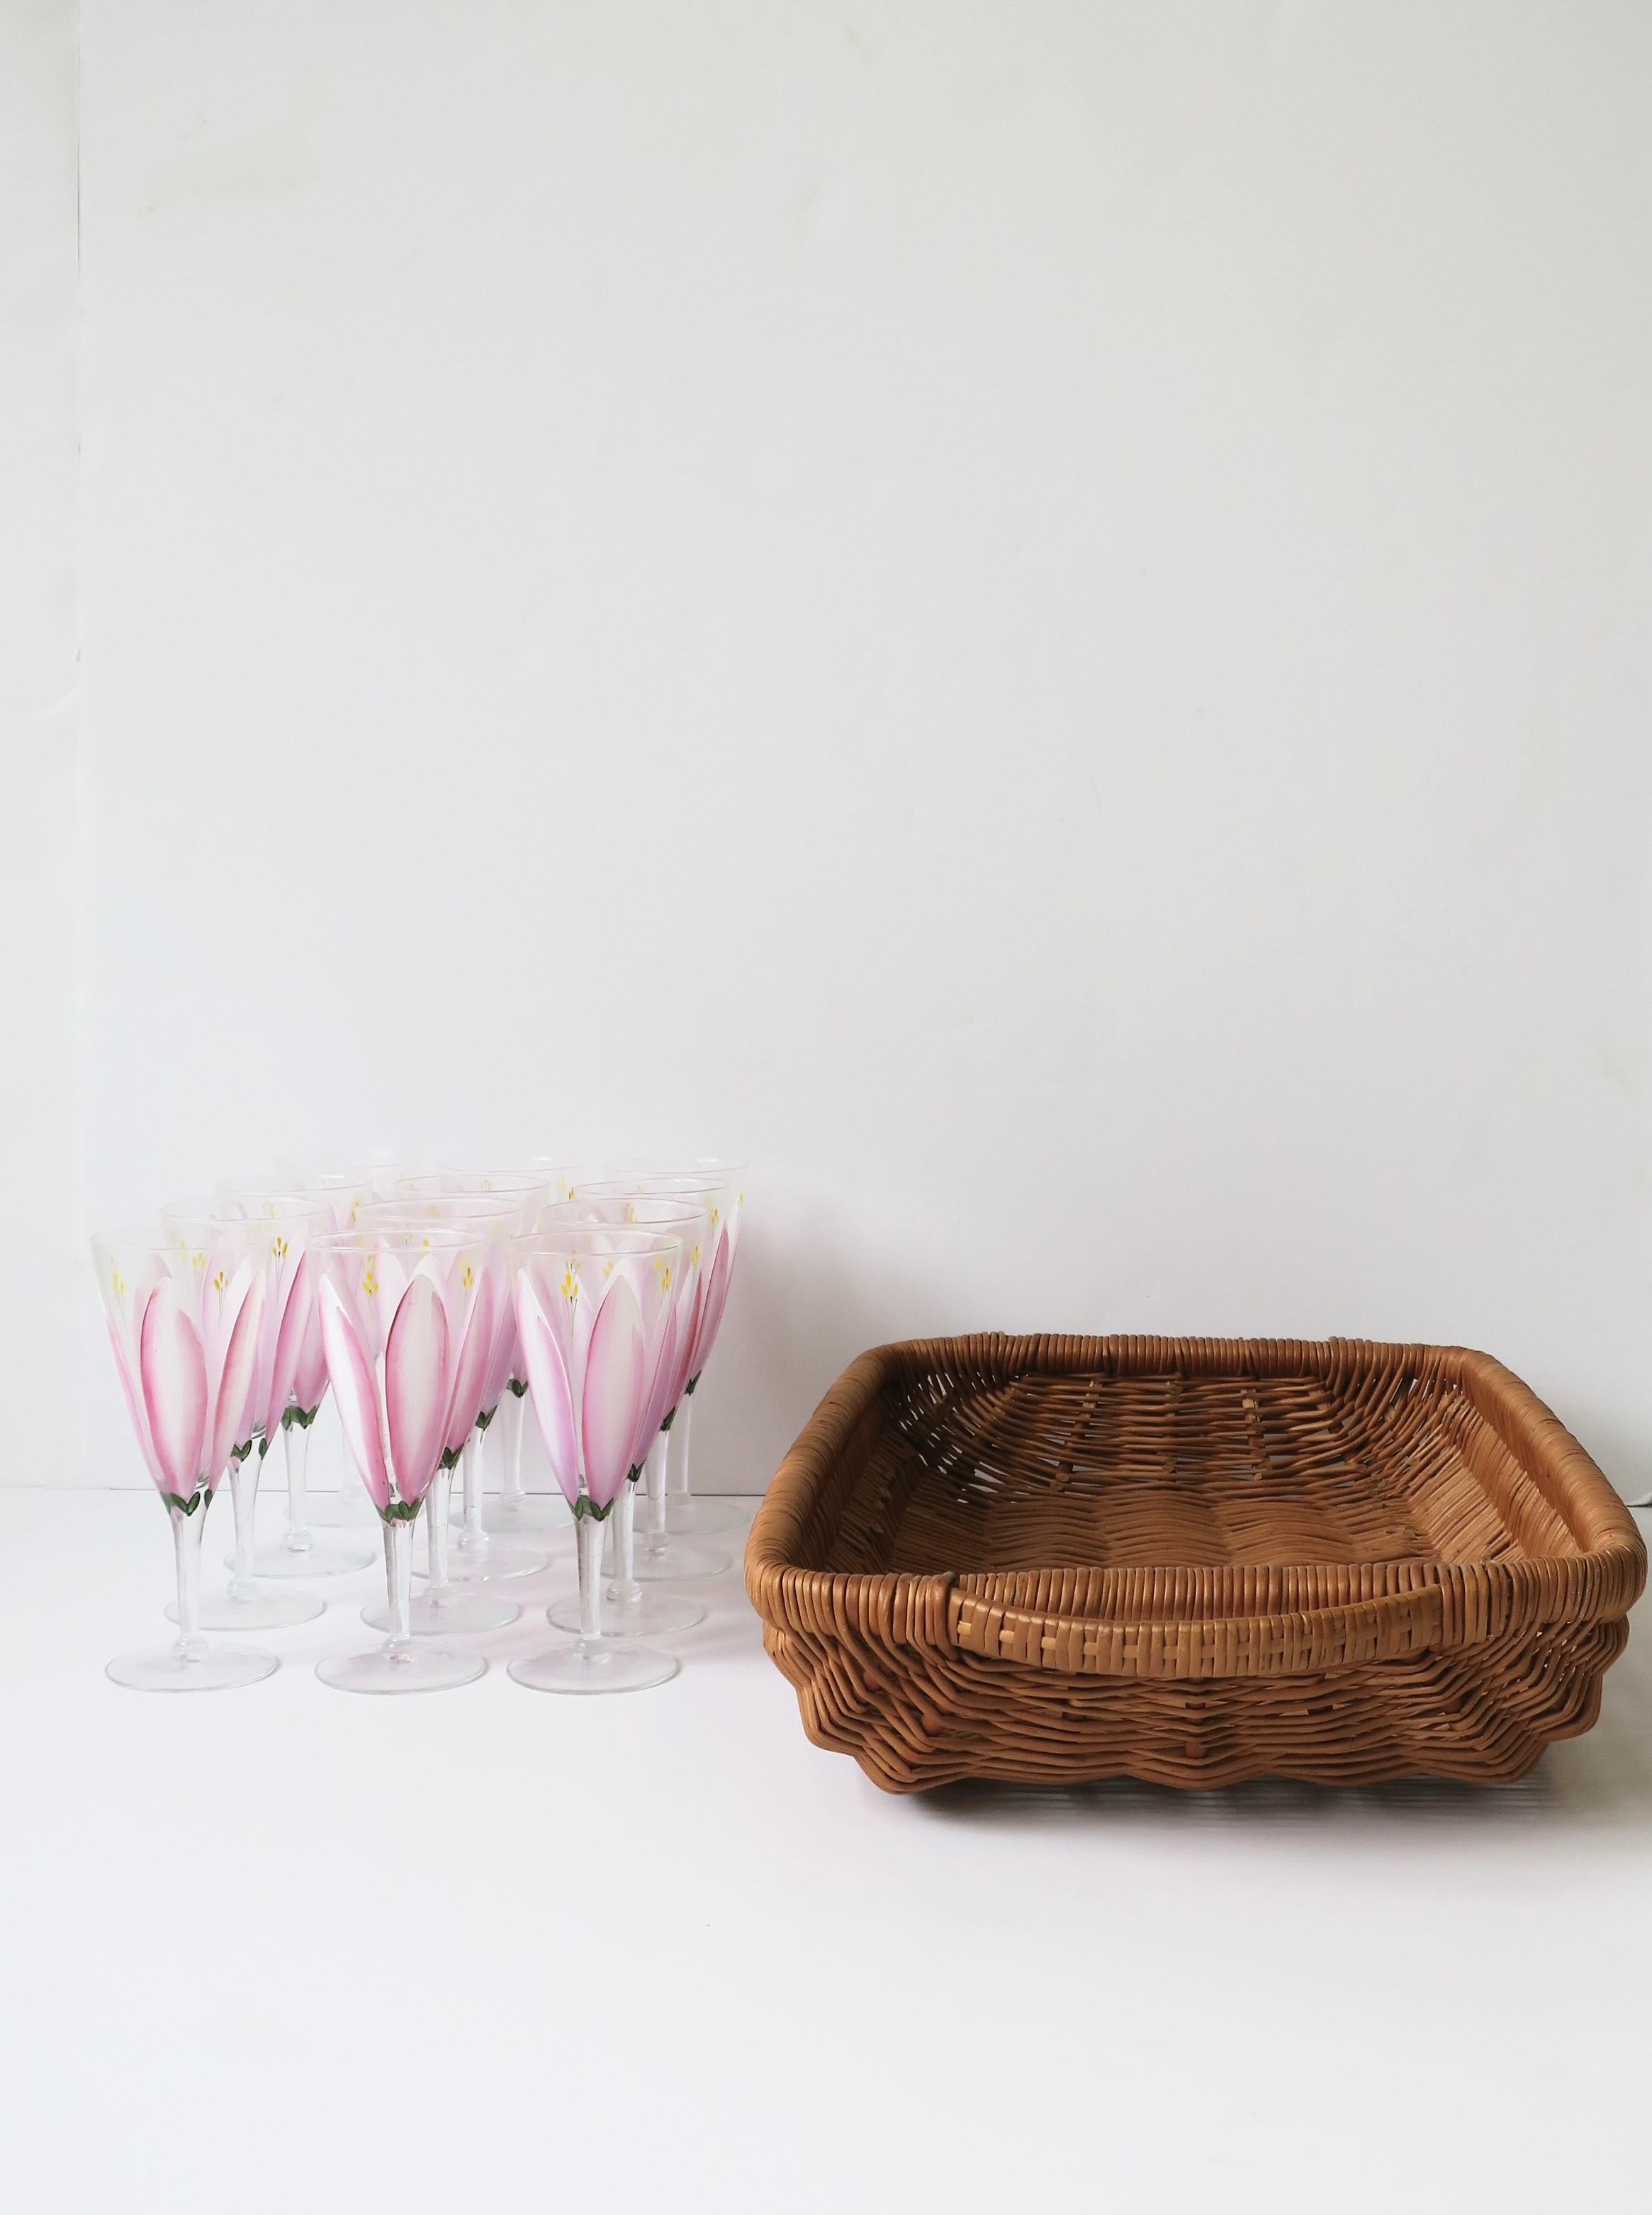 20th Century Wicker Serving Tray or Gathering Basket